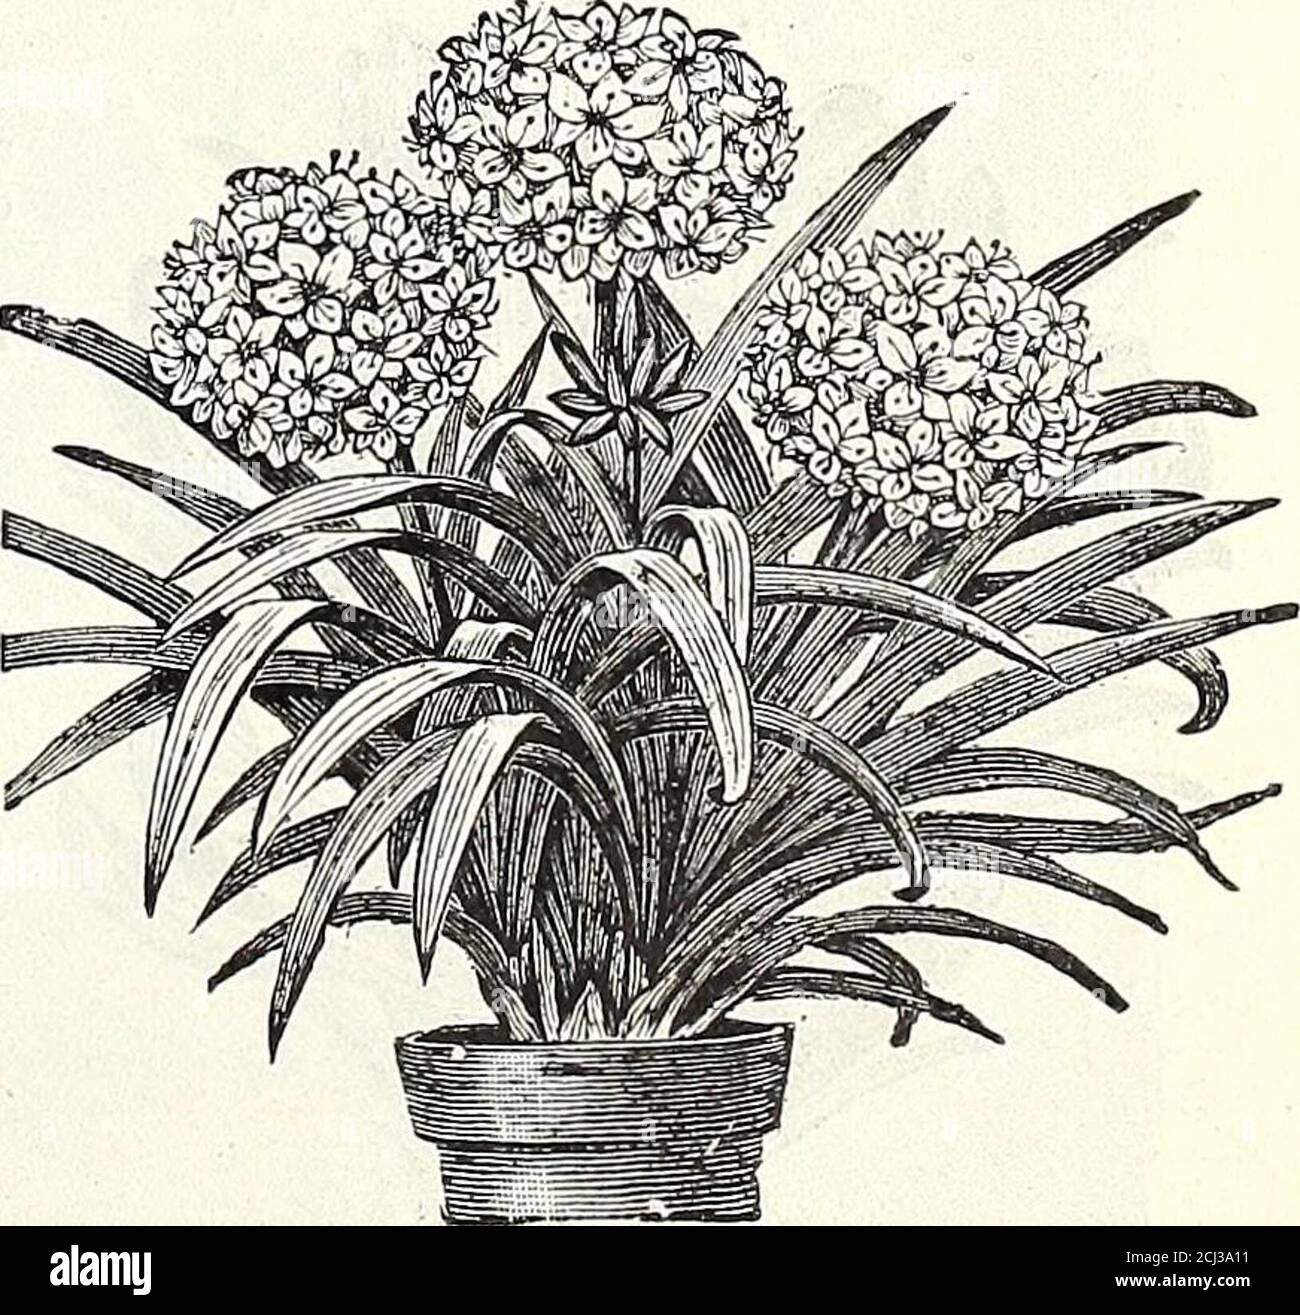 . Dreer's autumn 1904 catalogue . jperiod. The flowers are about 2inches long, and are borne in denseclusters of from ten to twenty flow-ers on each ; in color it is of a fineorange-red shading to buff. E.xlrastrong plants in 6-inch pots, 75 cts.each. Crown Imperials. Very showy and statelv early spring-blooming plants. 1 he flowers are bell-shaped, and are borne in a whorl atthe top of the plant, which grows fromWhite Calla. 3 to 4 feet high. The Crown Imperials will grow well in any good gardensoil, and if it can he said to have preferences, it is for a deep loam. Atthe time of planting the Stock Photo